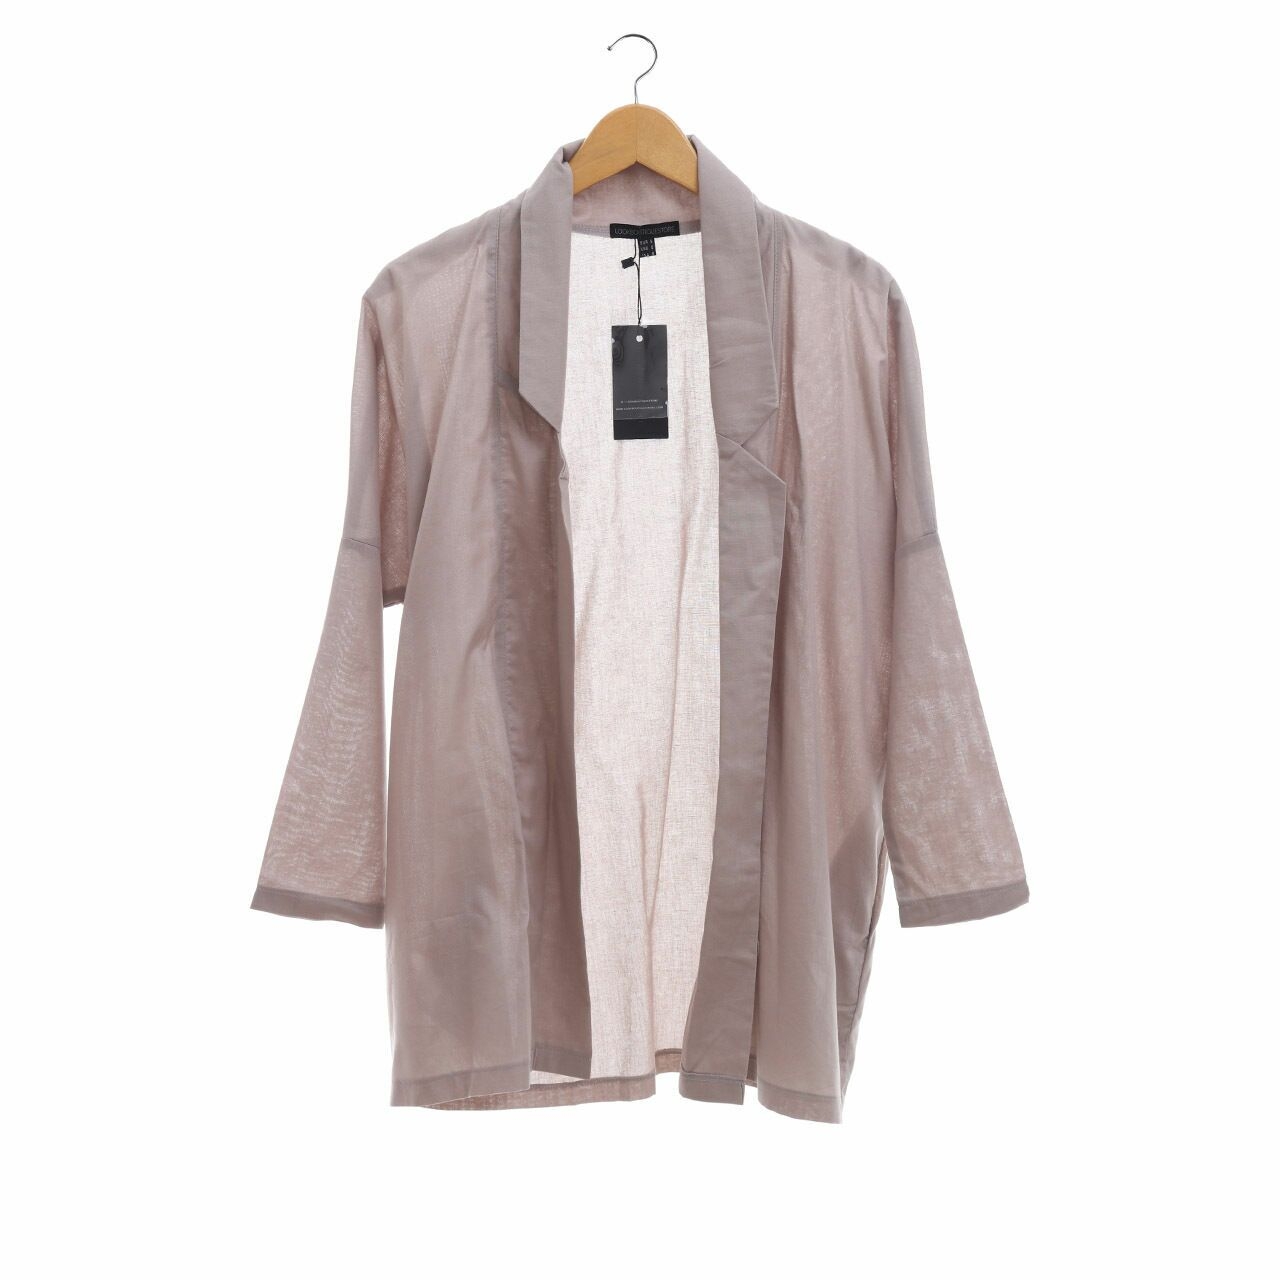 Lookboutiojestore Taupe Outerwear